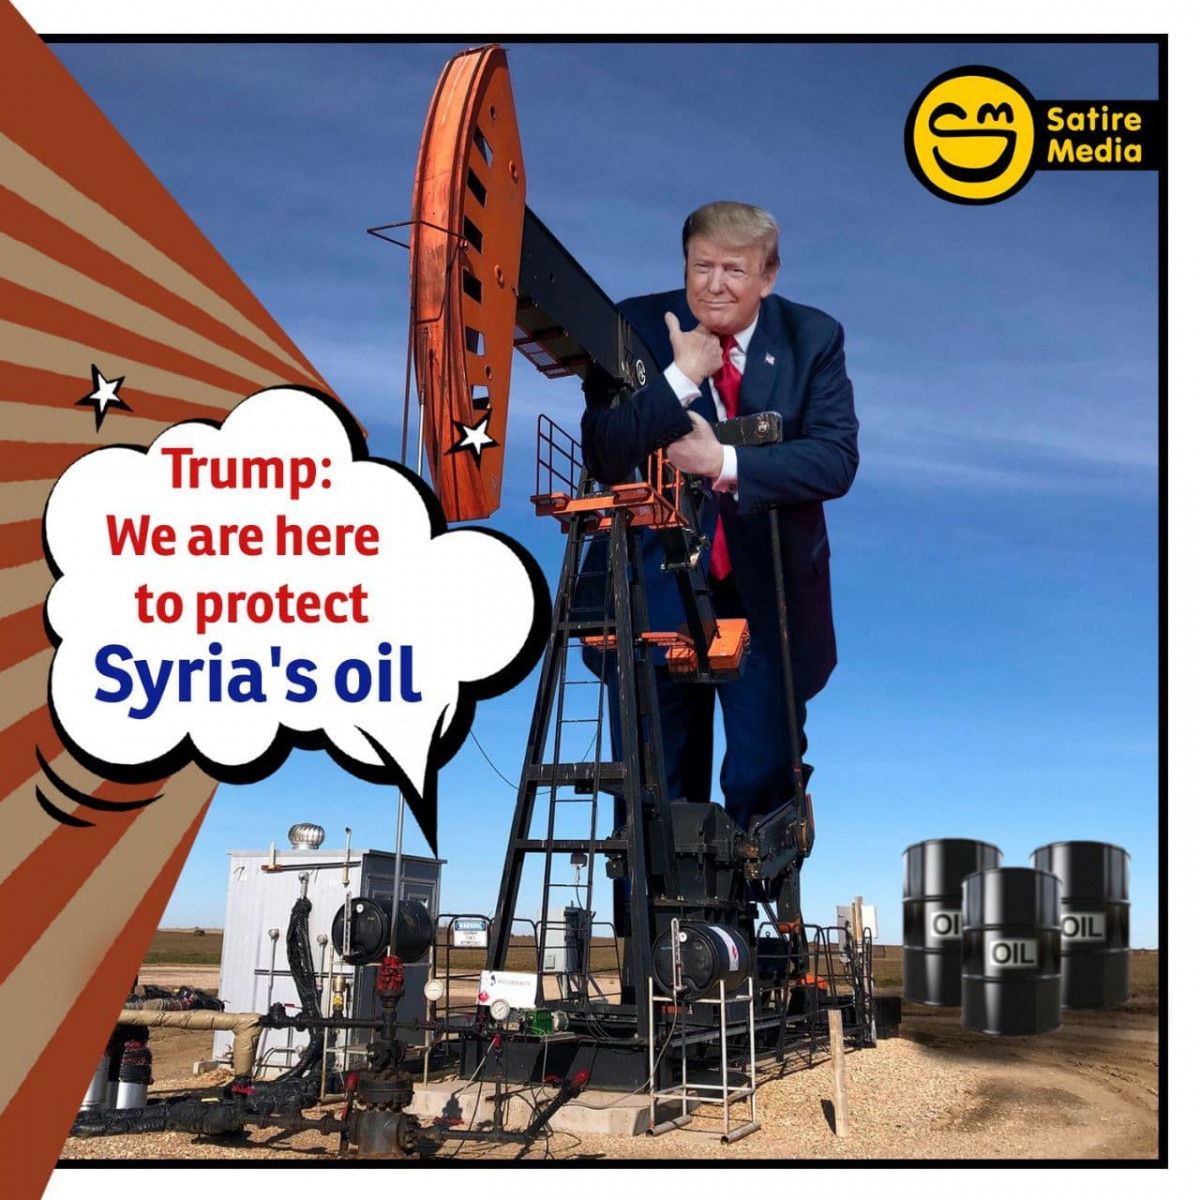 Trump: We are here to protect Syria's oil